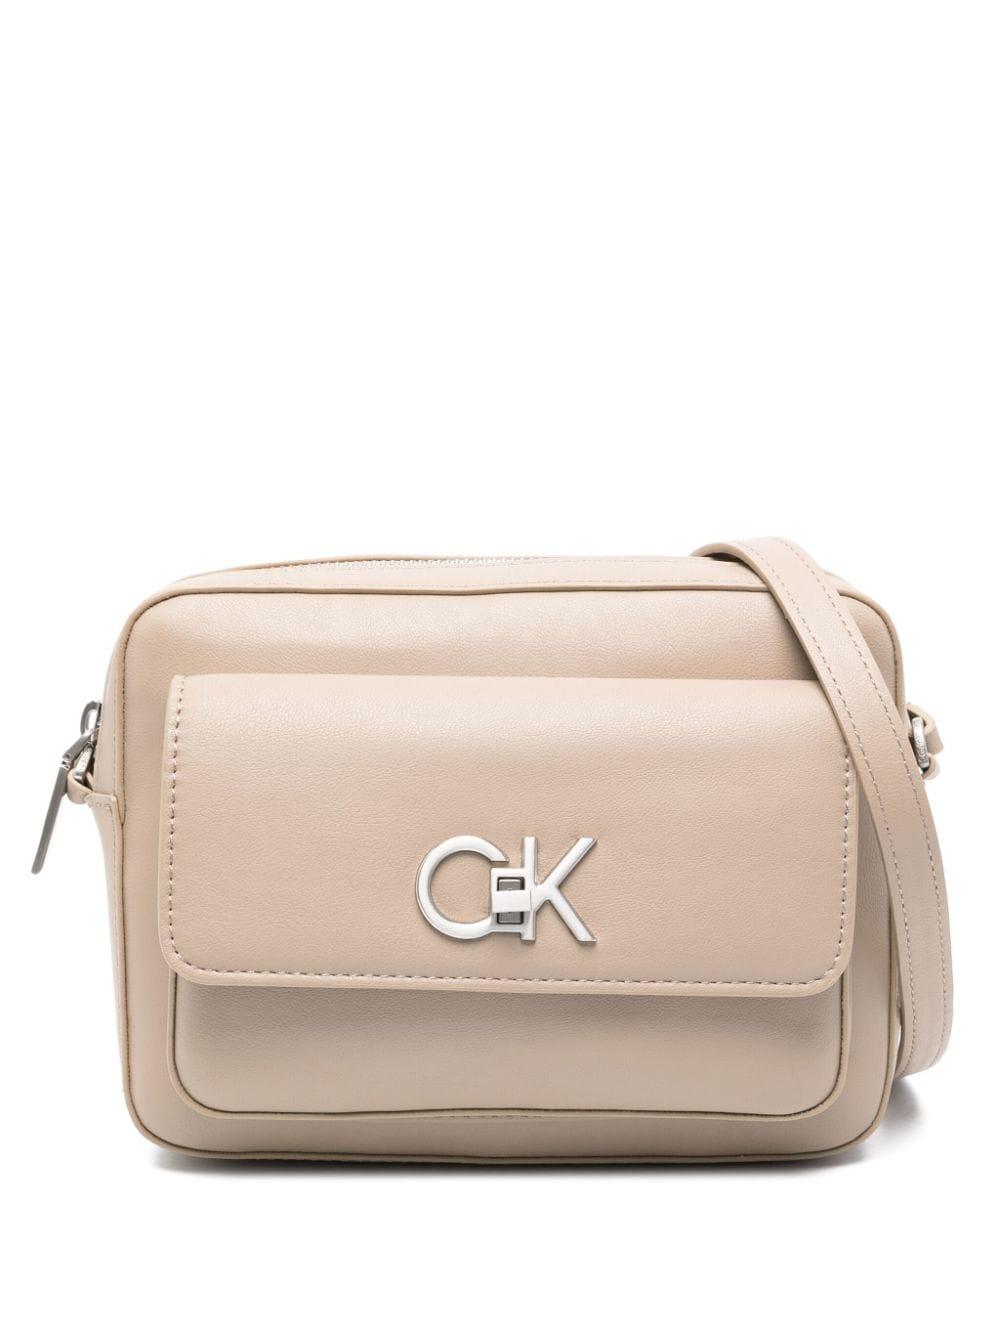 Calvin Klein Logo-plaque Leather Crossbody Bag in Natural | Lyst